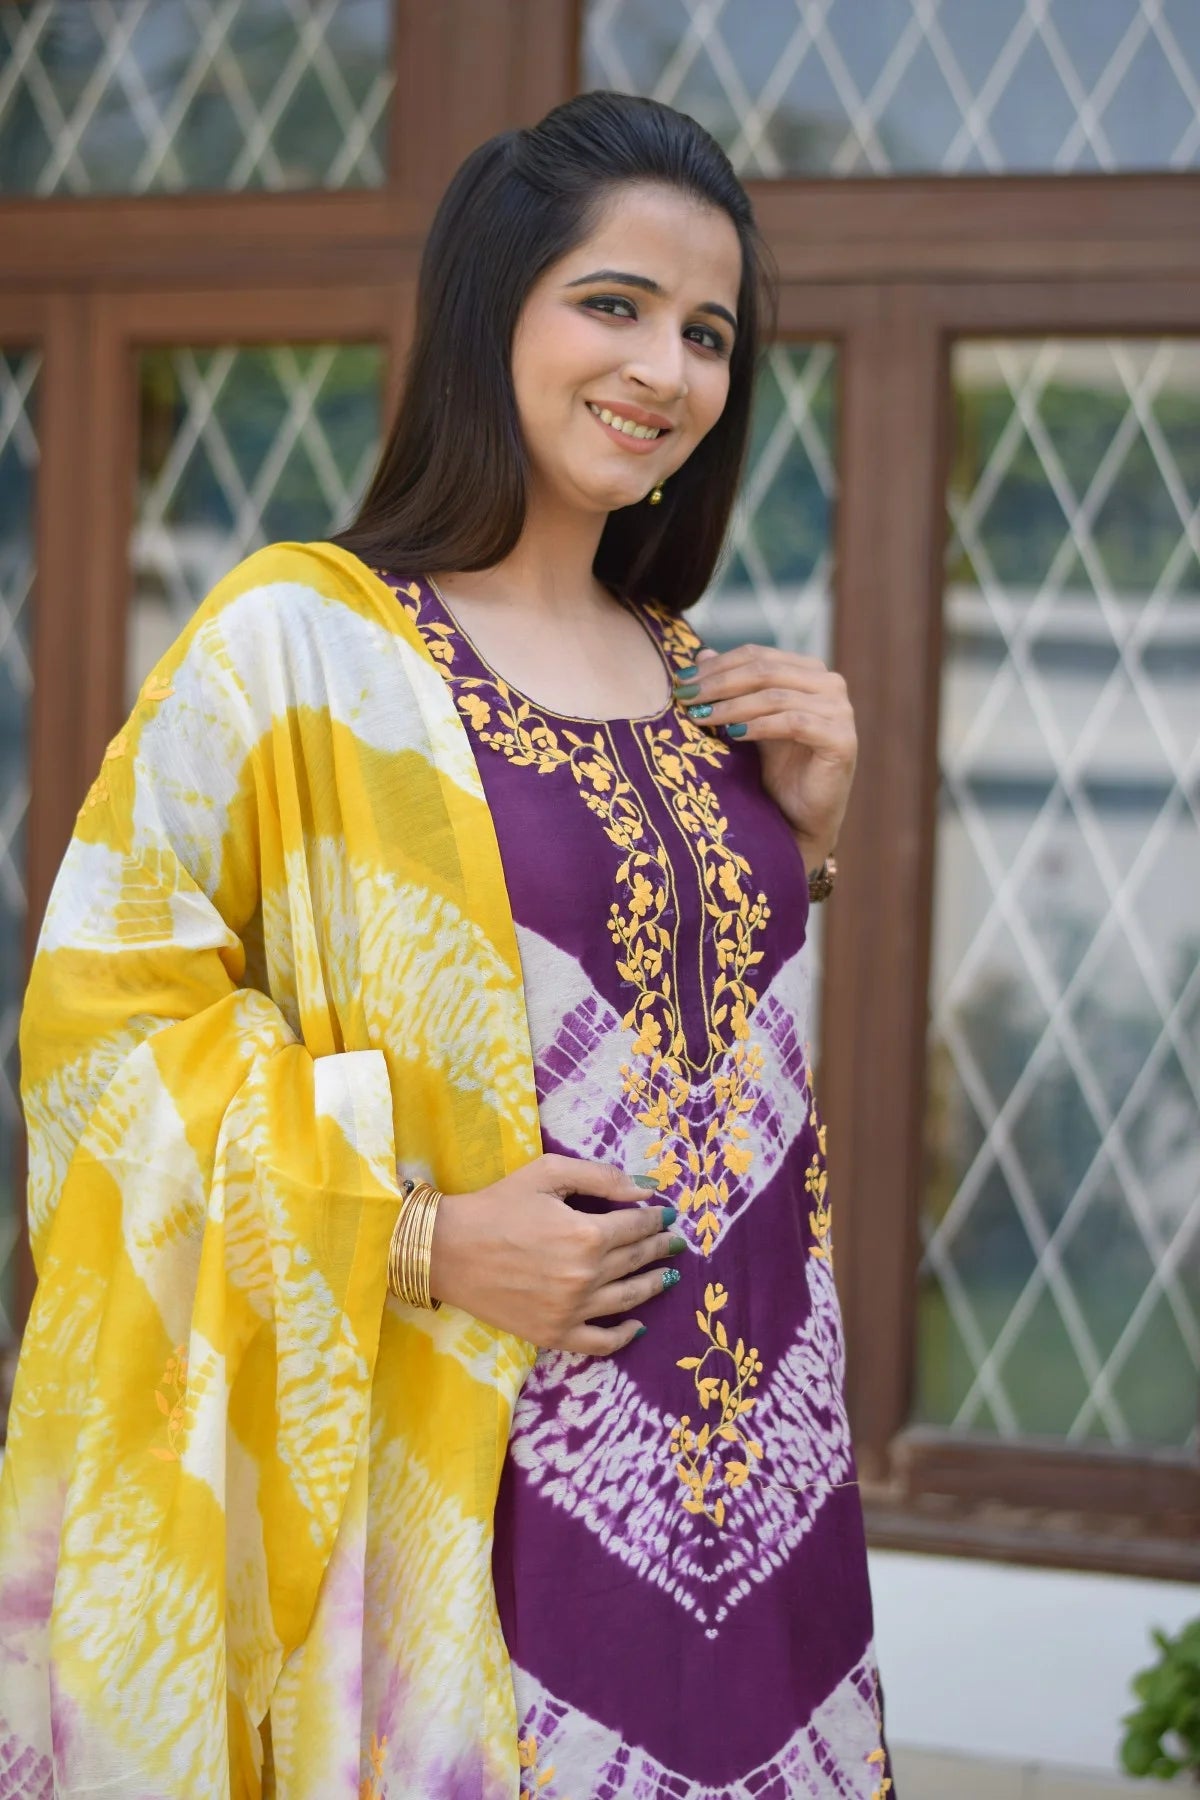 A fashionable and comfortable Indian outfit featuring a purple and yellow tie-dye kurta and dupatta with intricate embellishments, paired with yellow palazzo pants for a chic and trendy look.